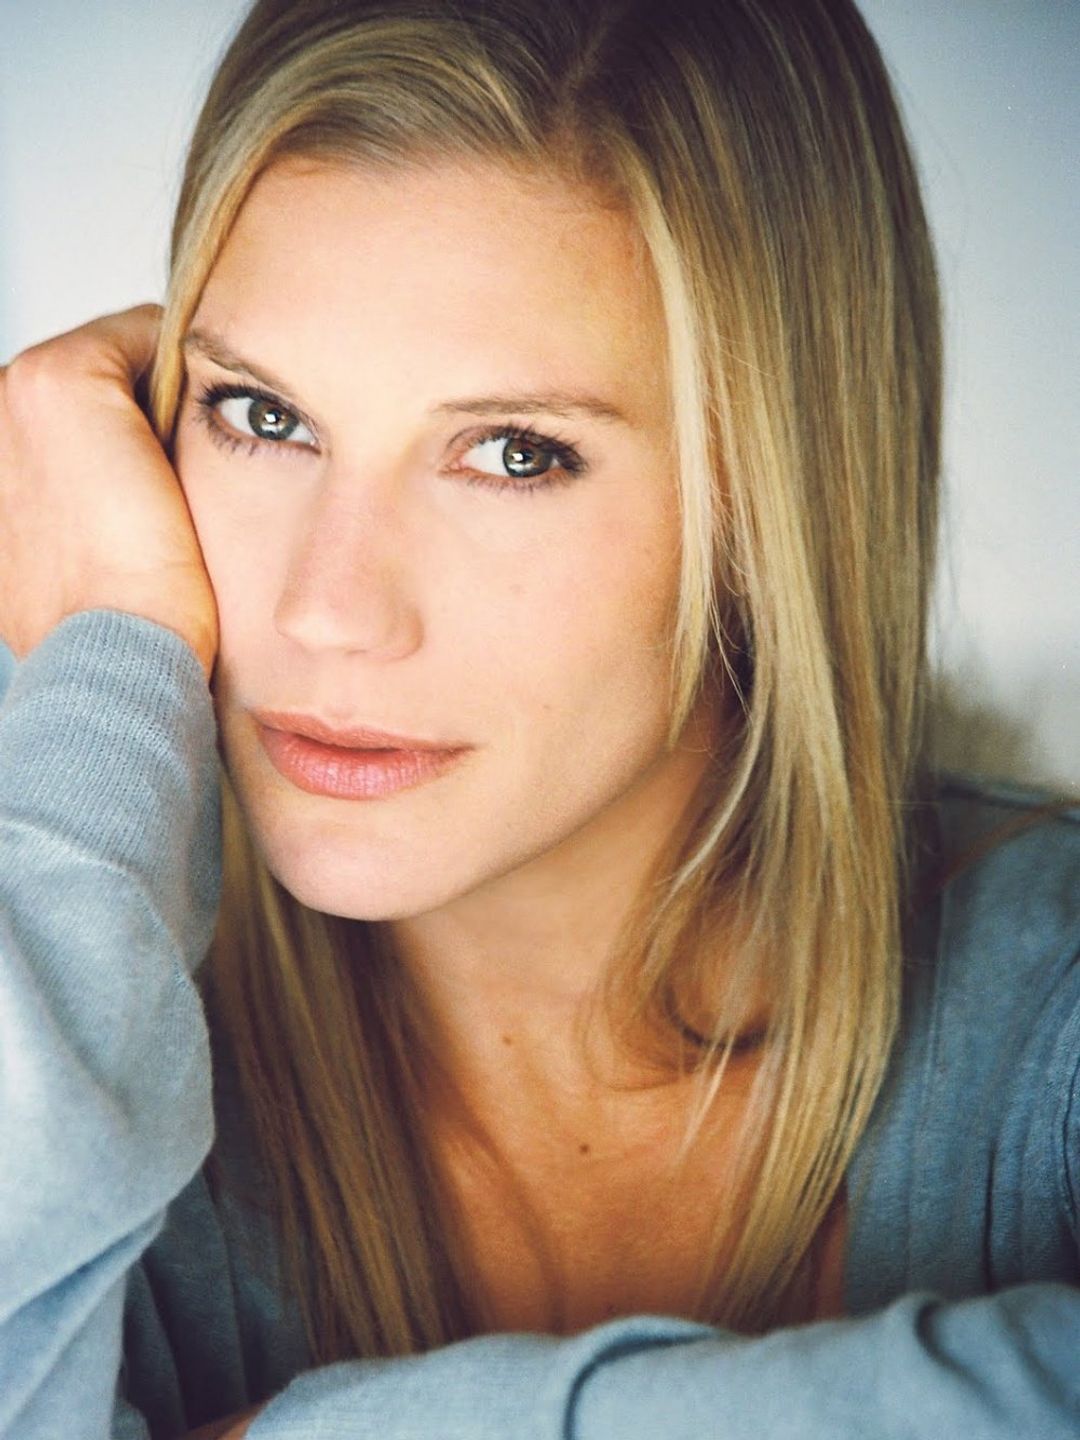 Katee Sackhoff in her youth